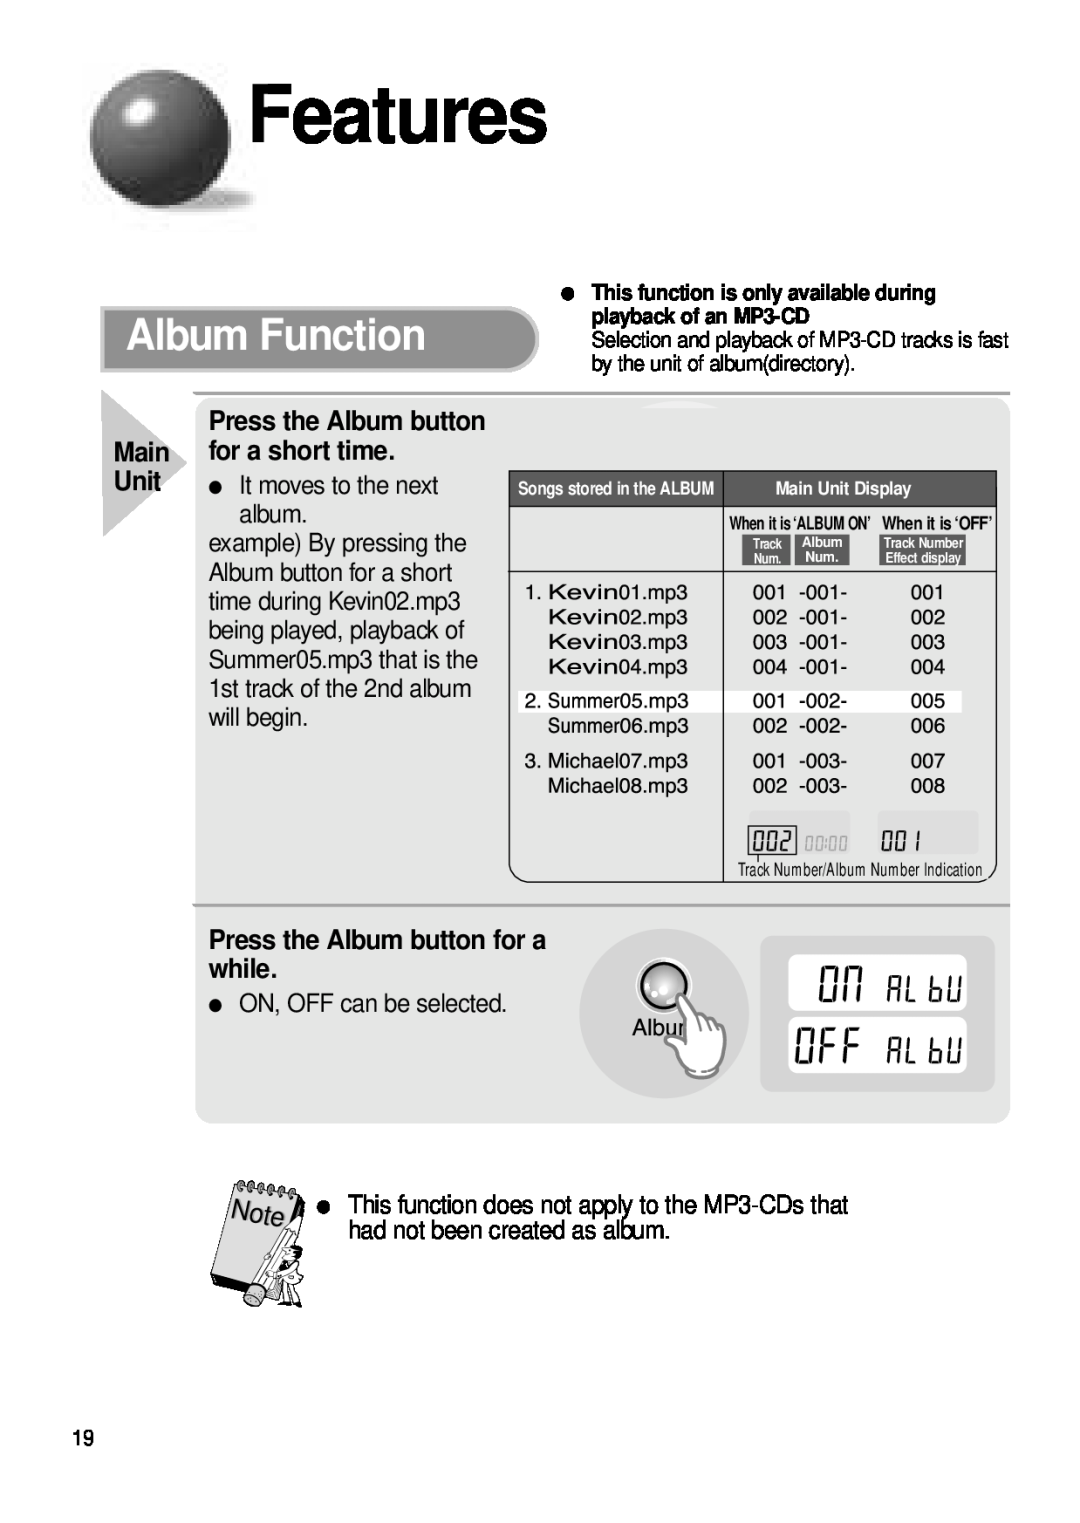 Samsung MCD-MP67 Album Function, Features, Press the Album button for a while, Press the Album button for a short time 